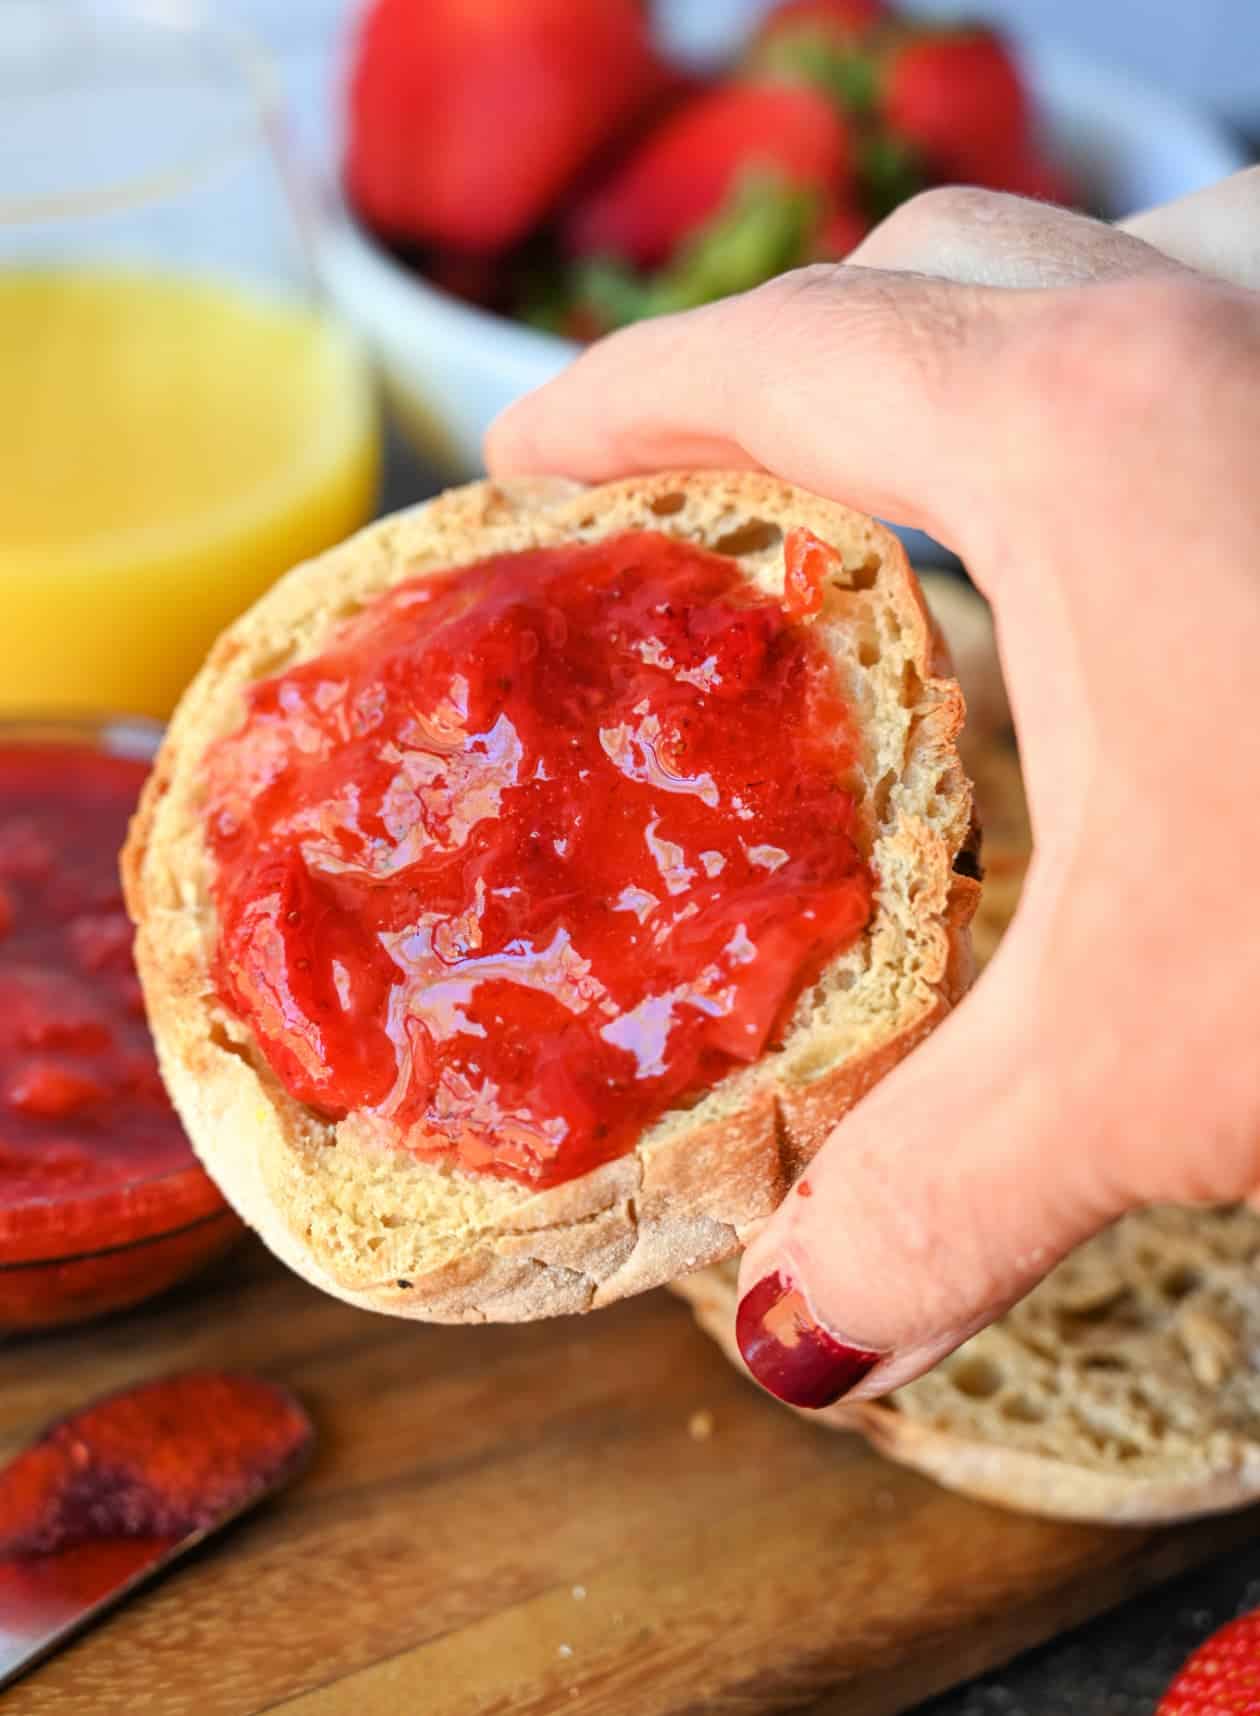 Strawberry jam spread on an english muffine and being held.